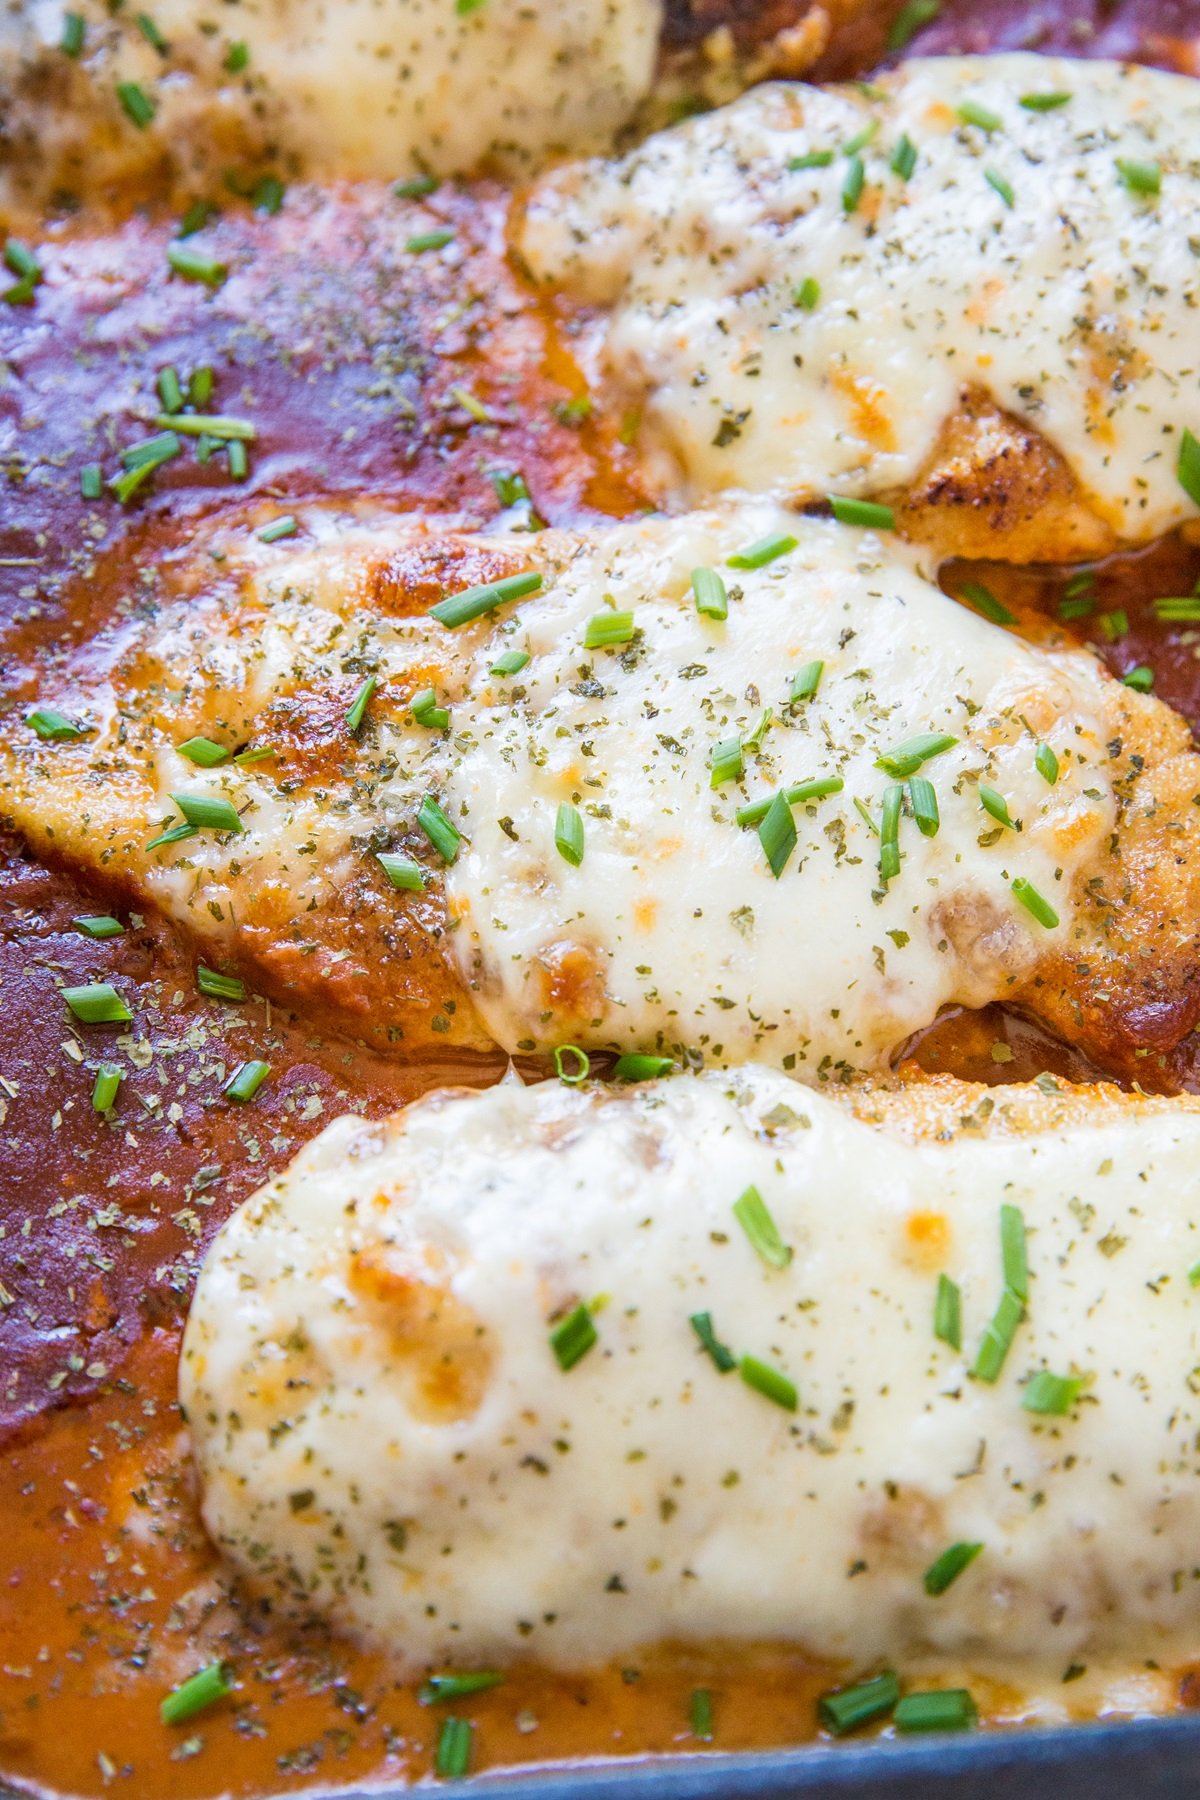 Keto Baked Chicken Parmesan - grain-free chicken parmesan recipe that is low-carb and keto-friendly